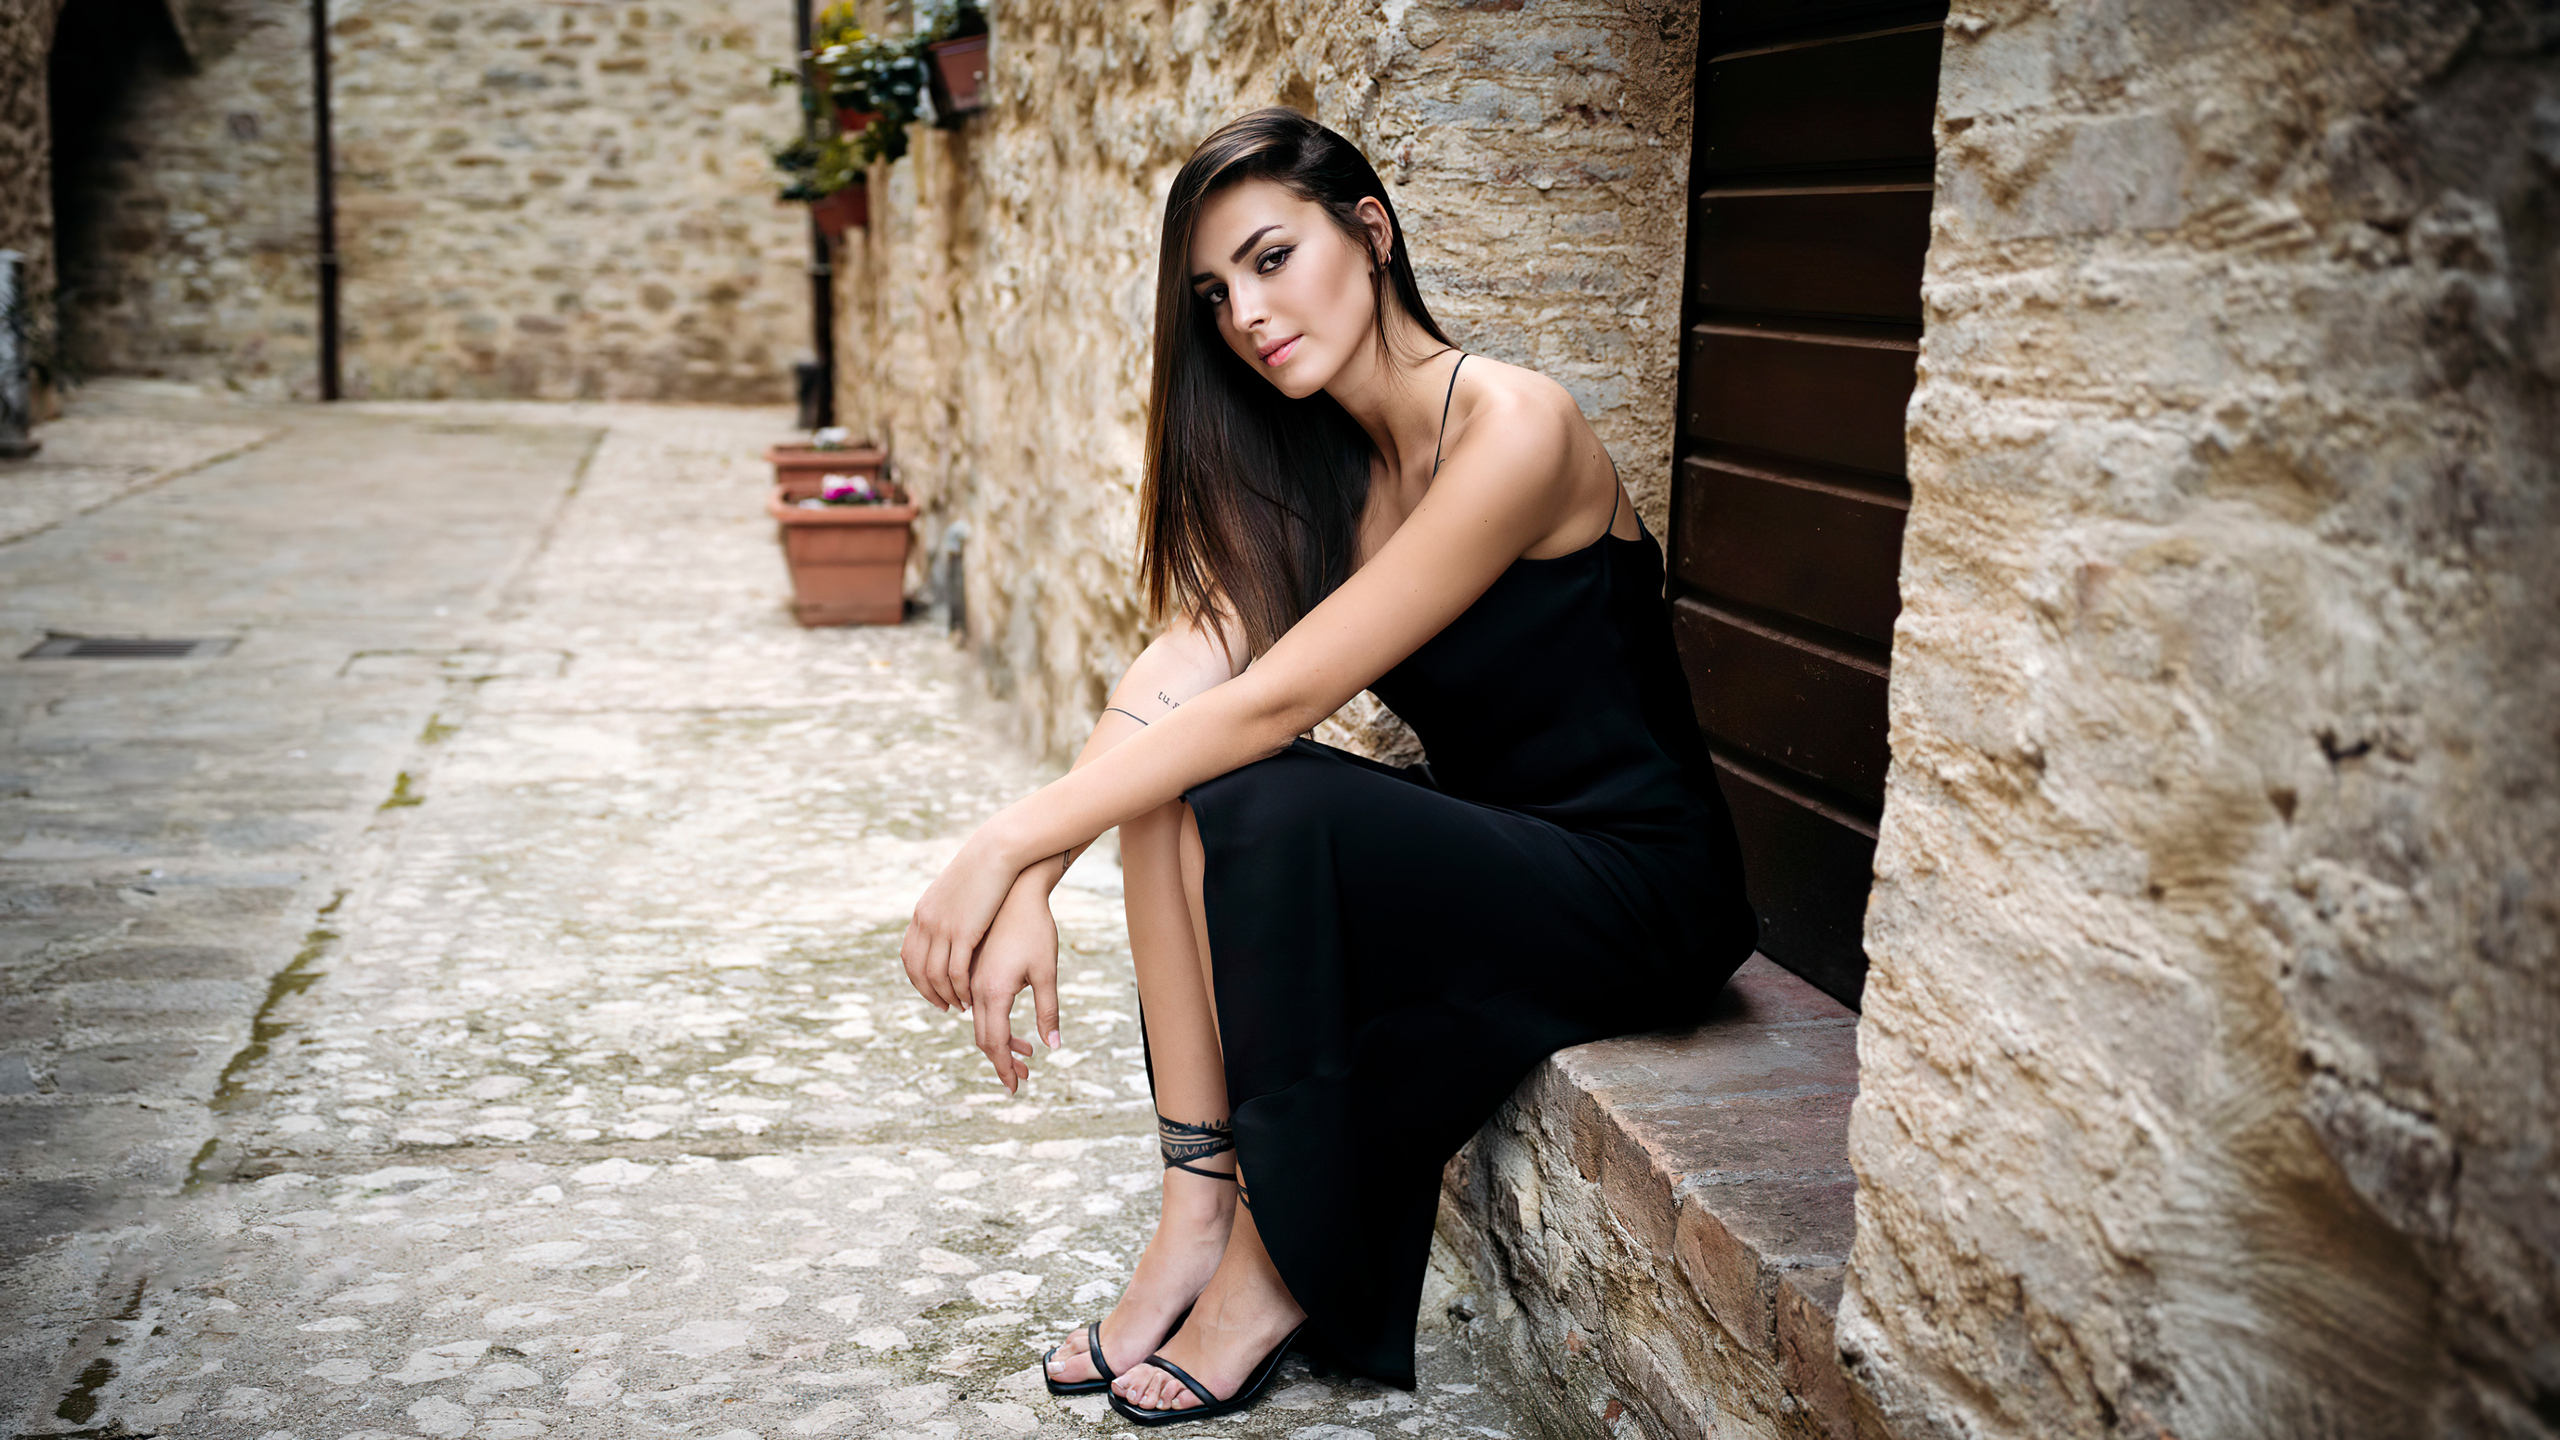 2560x1440 Girl In Black Dress On Streets Of Italy 1440P Resolution ,HD ...